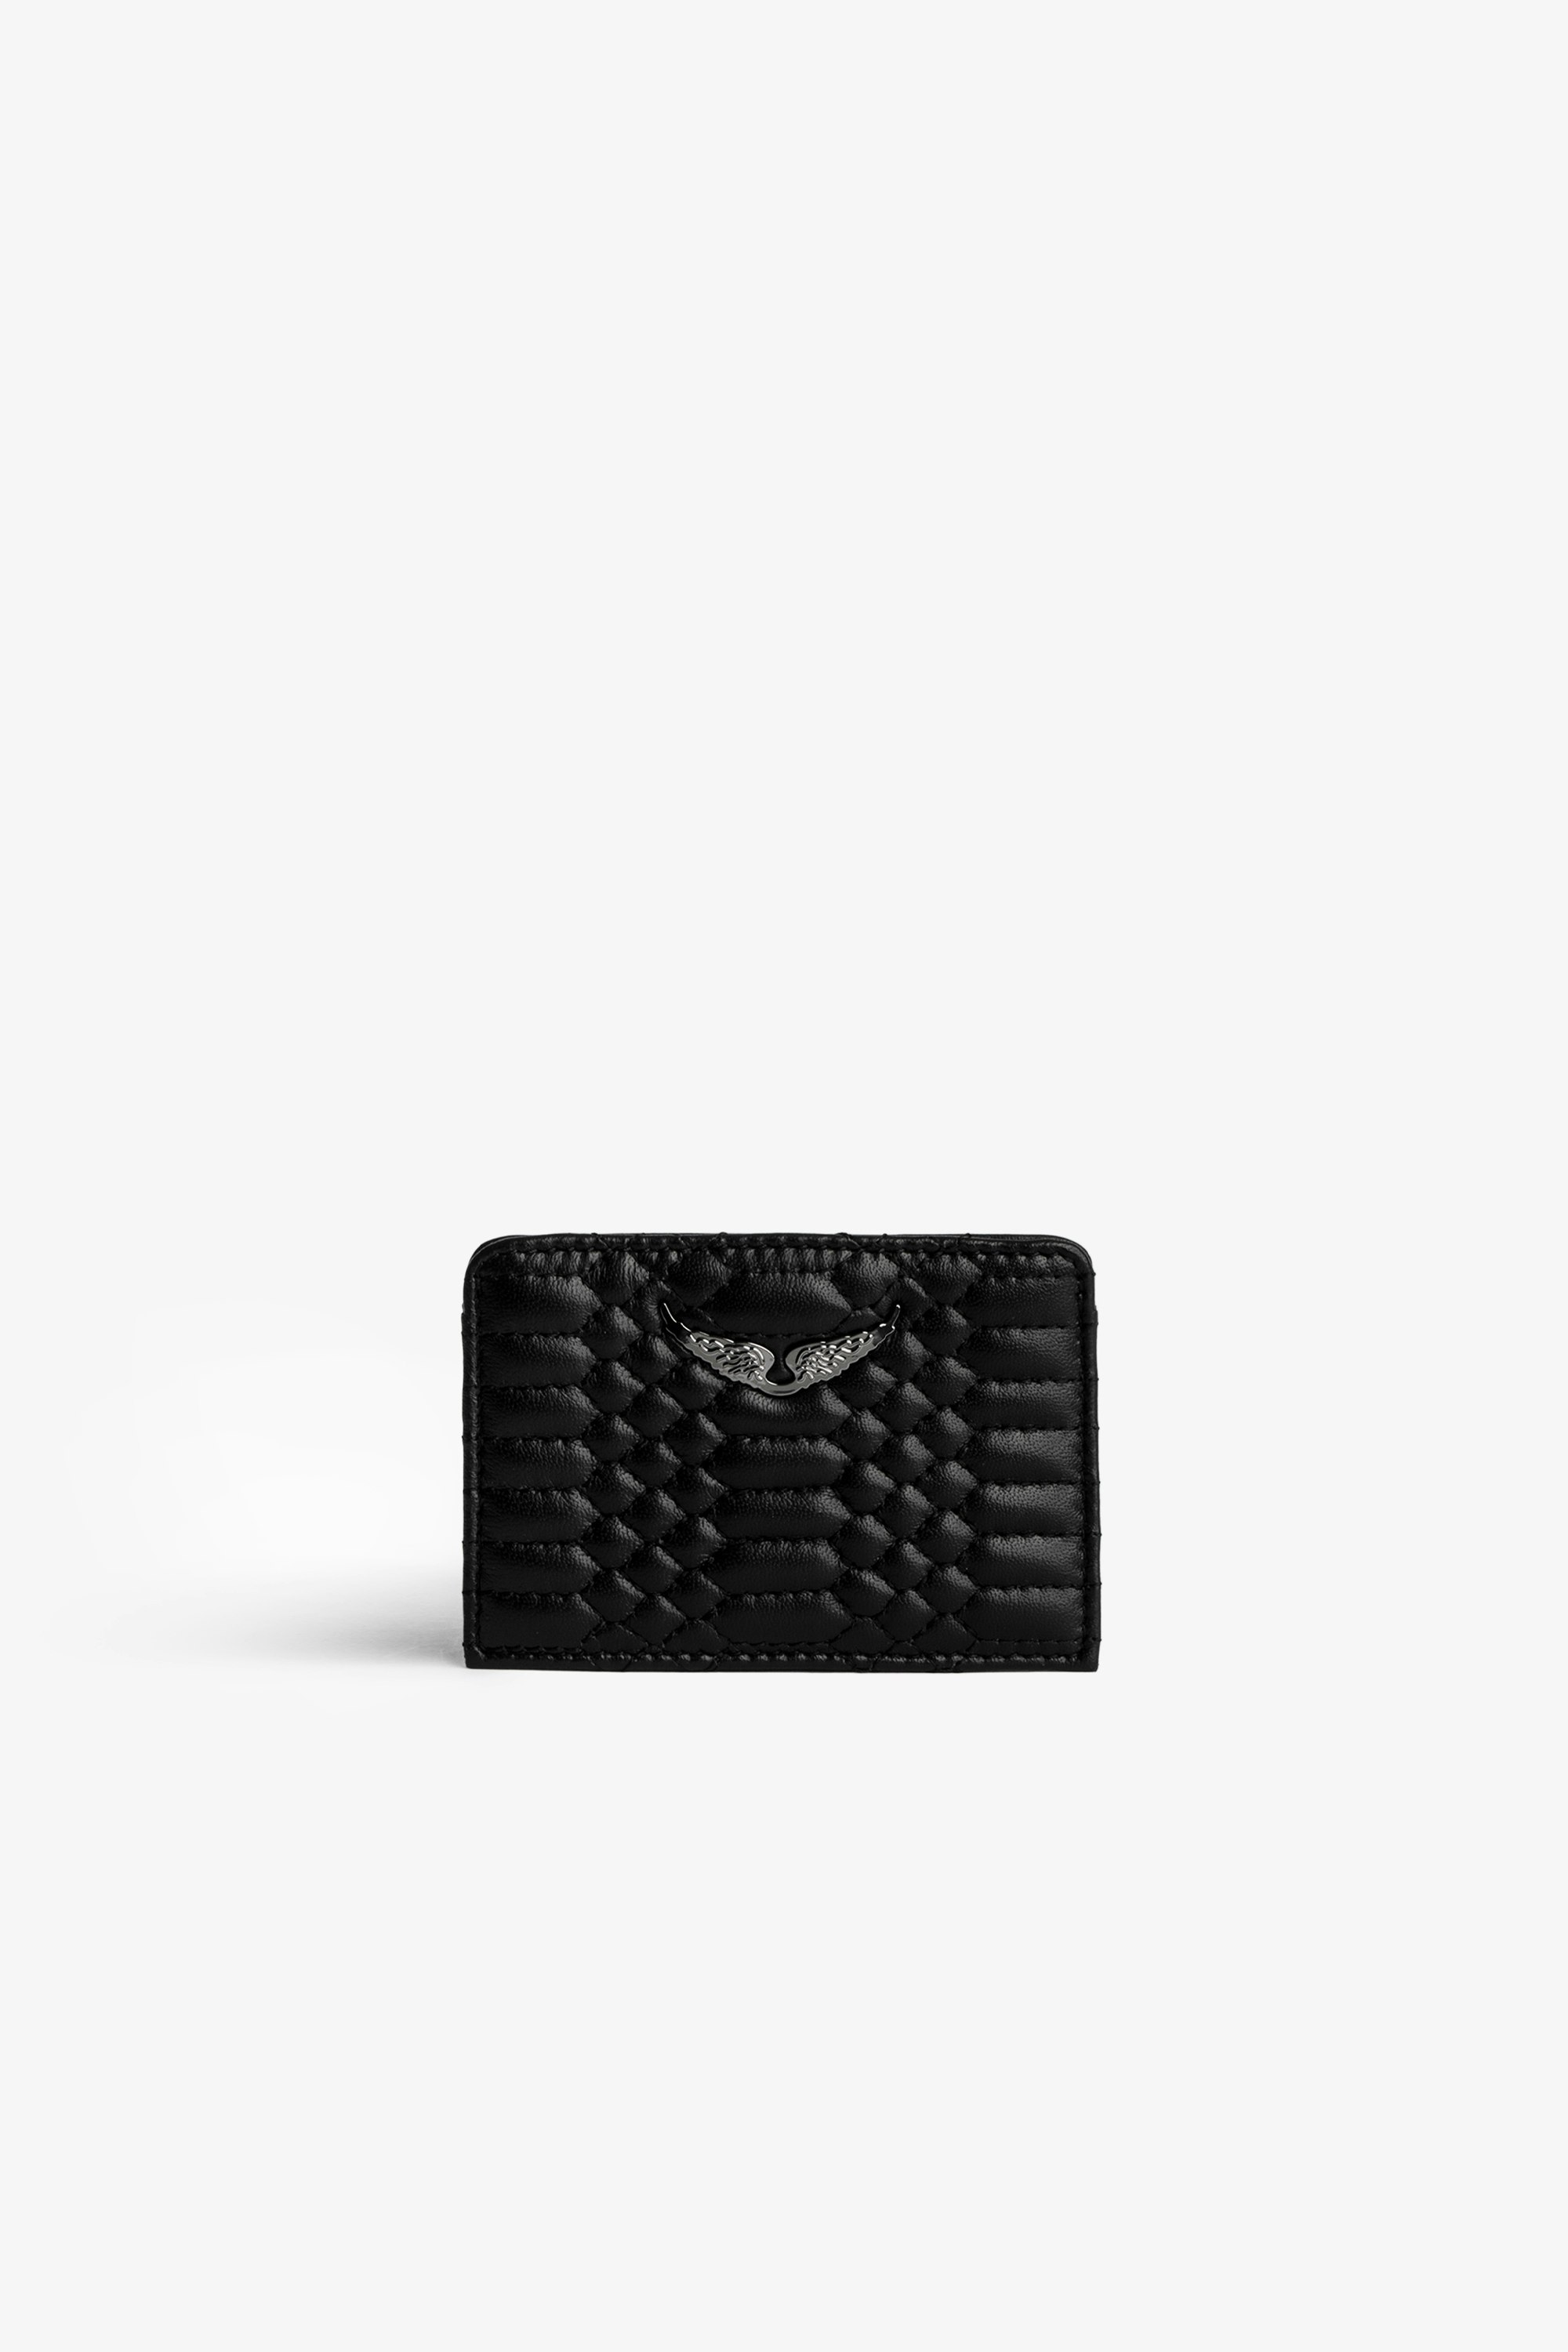 ZV Pass 財布 Women's matte black quilted leather card holder